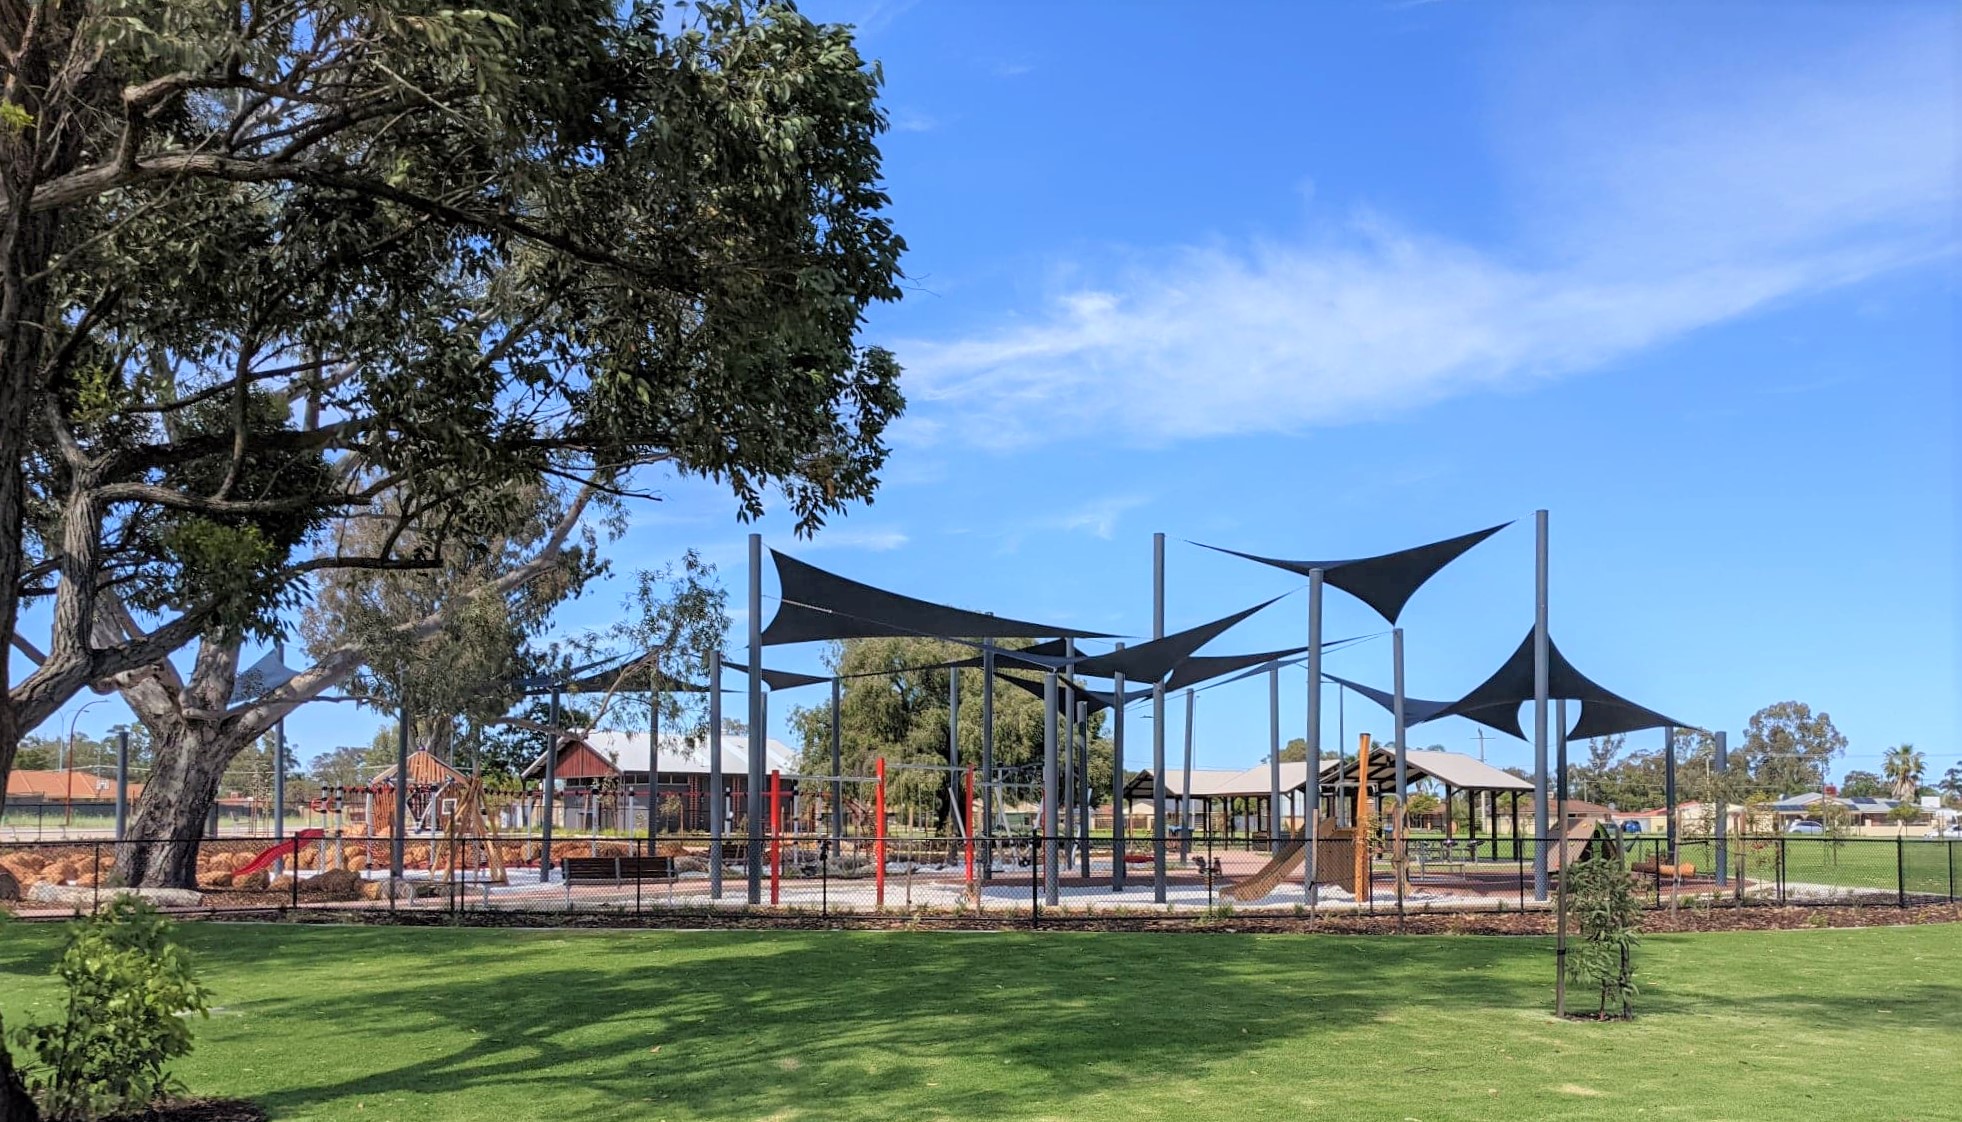 Check out the $6.5M redevelopment of Robinson Park Gosnells